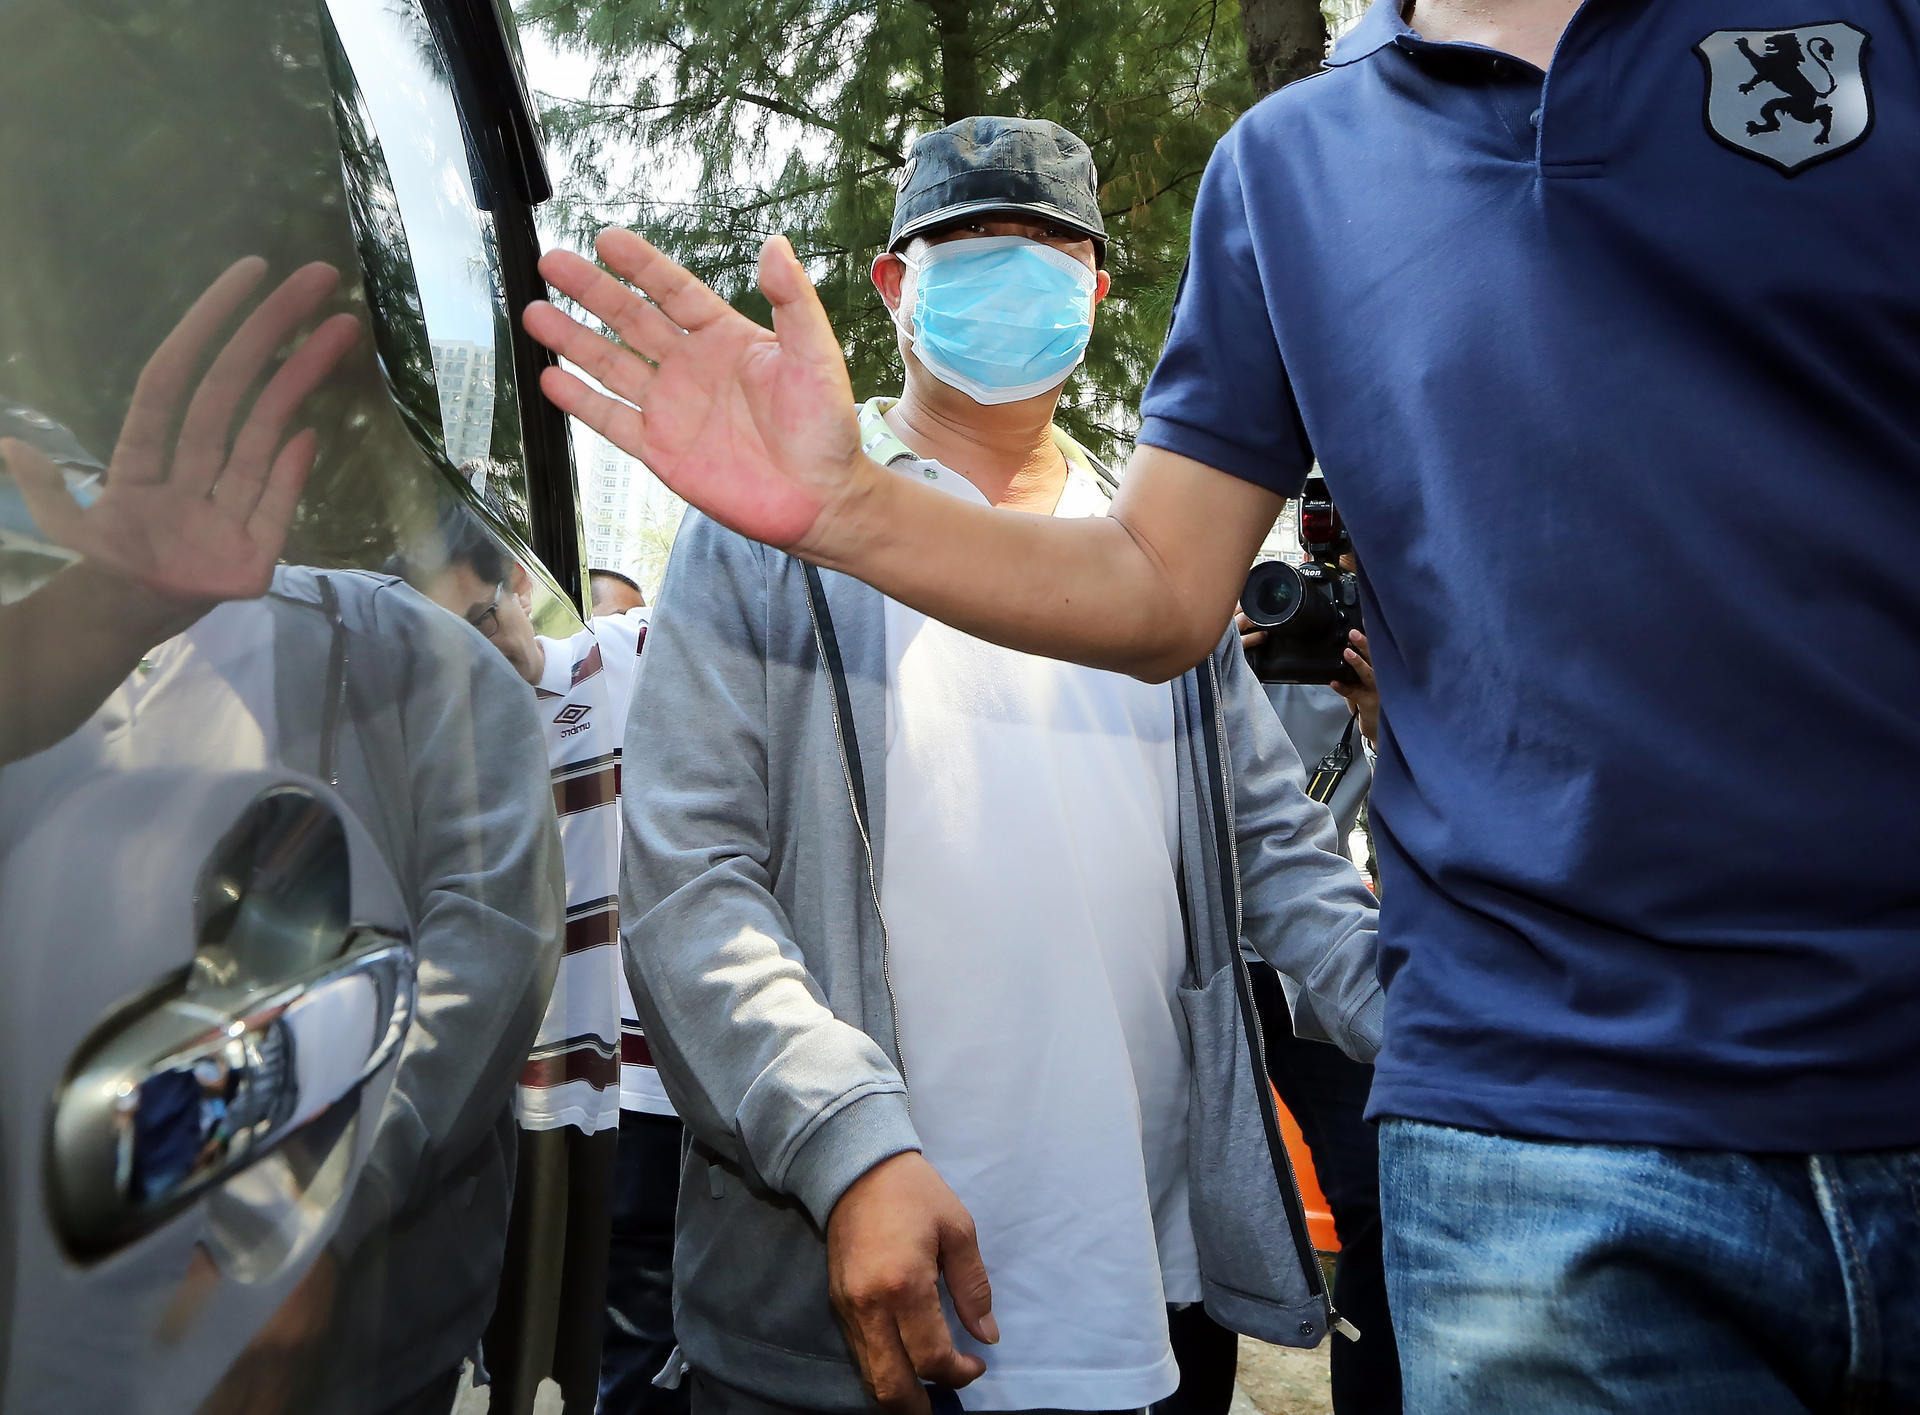 A masked Cheung Chi-tai makes his second appearance at Eastern Court yesterday. Photo: Sam Tsang